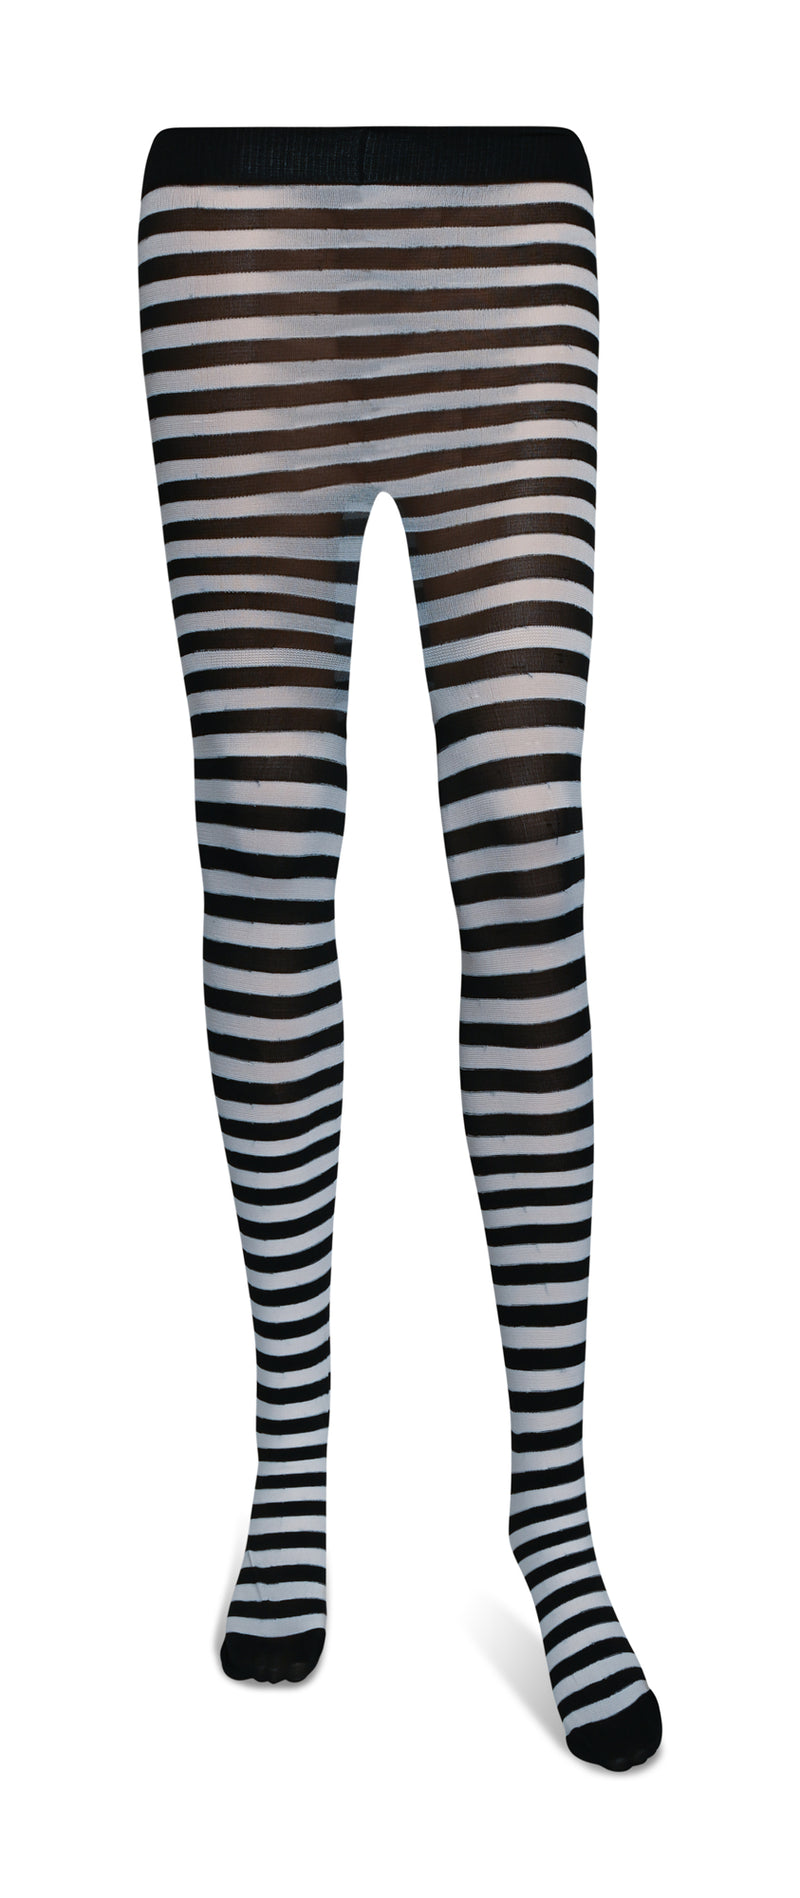 Black and White Tights - Striped Nylon Stretch Pantyhose Stocking Accessories for Every Day Attire and Costumes for Men, Women and Kids